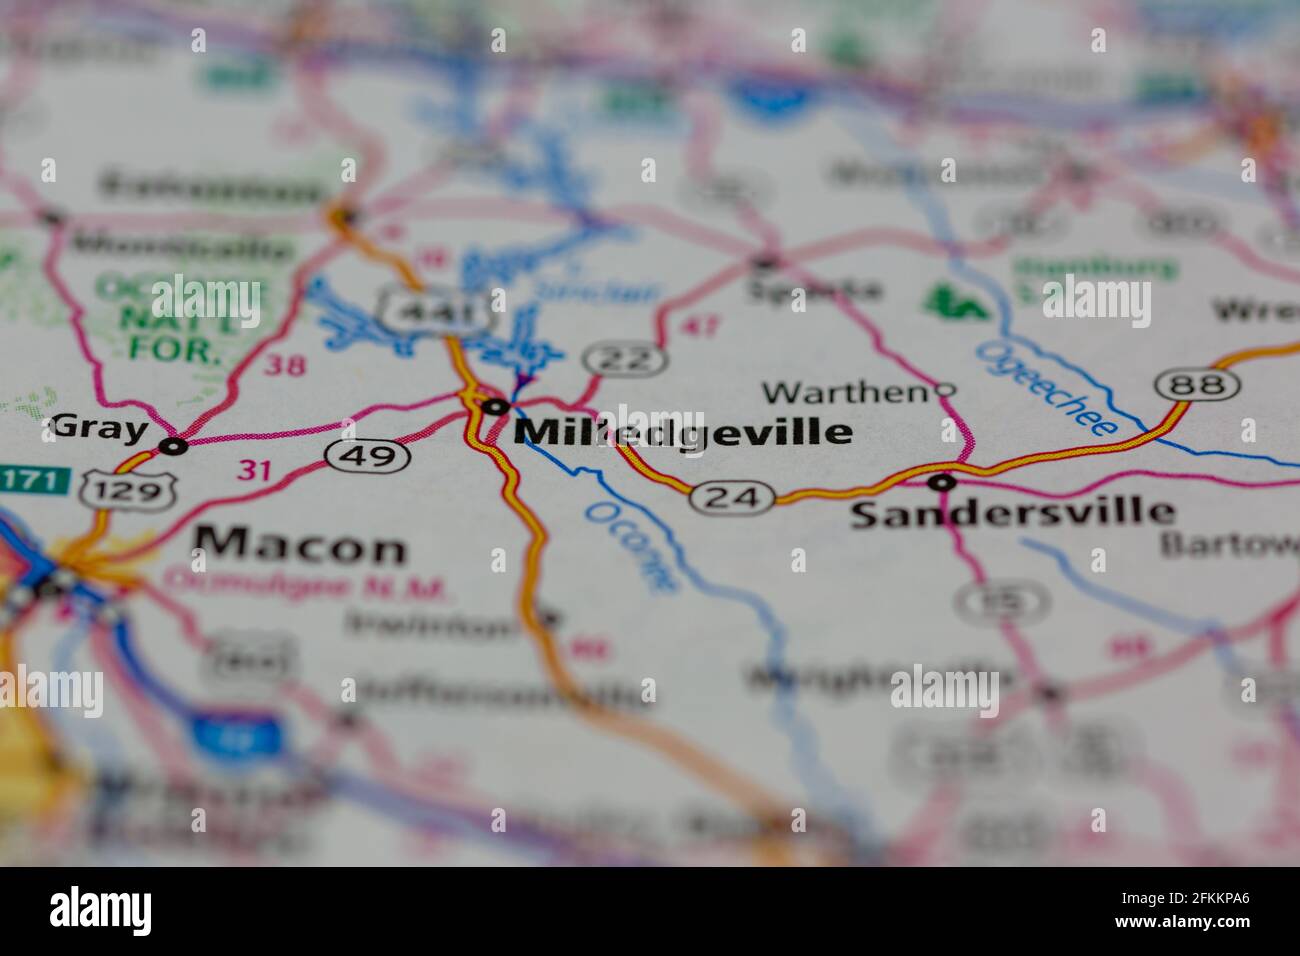 Milledgeville Georgia USA Shown on a Geography map or road map Stock Photo